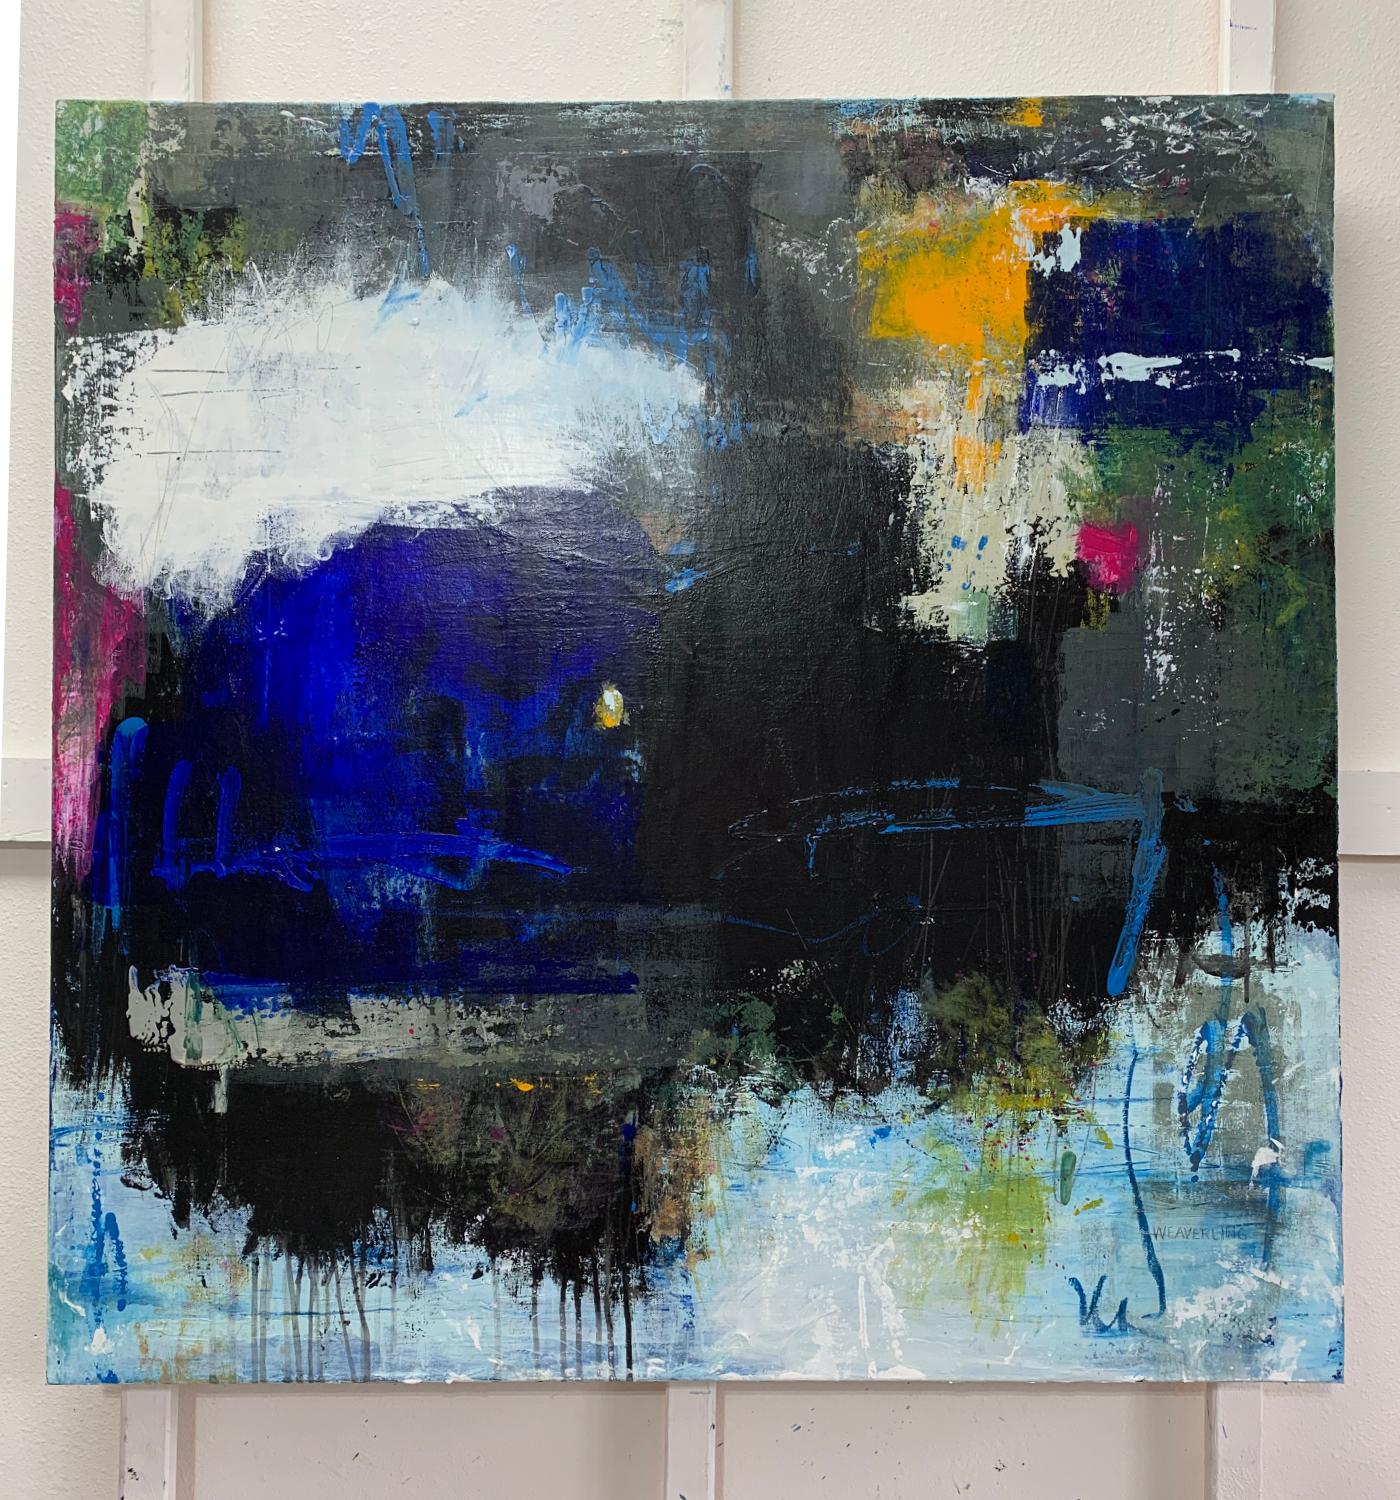 <p>Artist Comments<br>An intricate abstract painting evoking the rich ecosystem at the edge of a pond. Layers of blues and greens and touches of bright color fill the composition. 